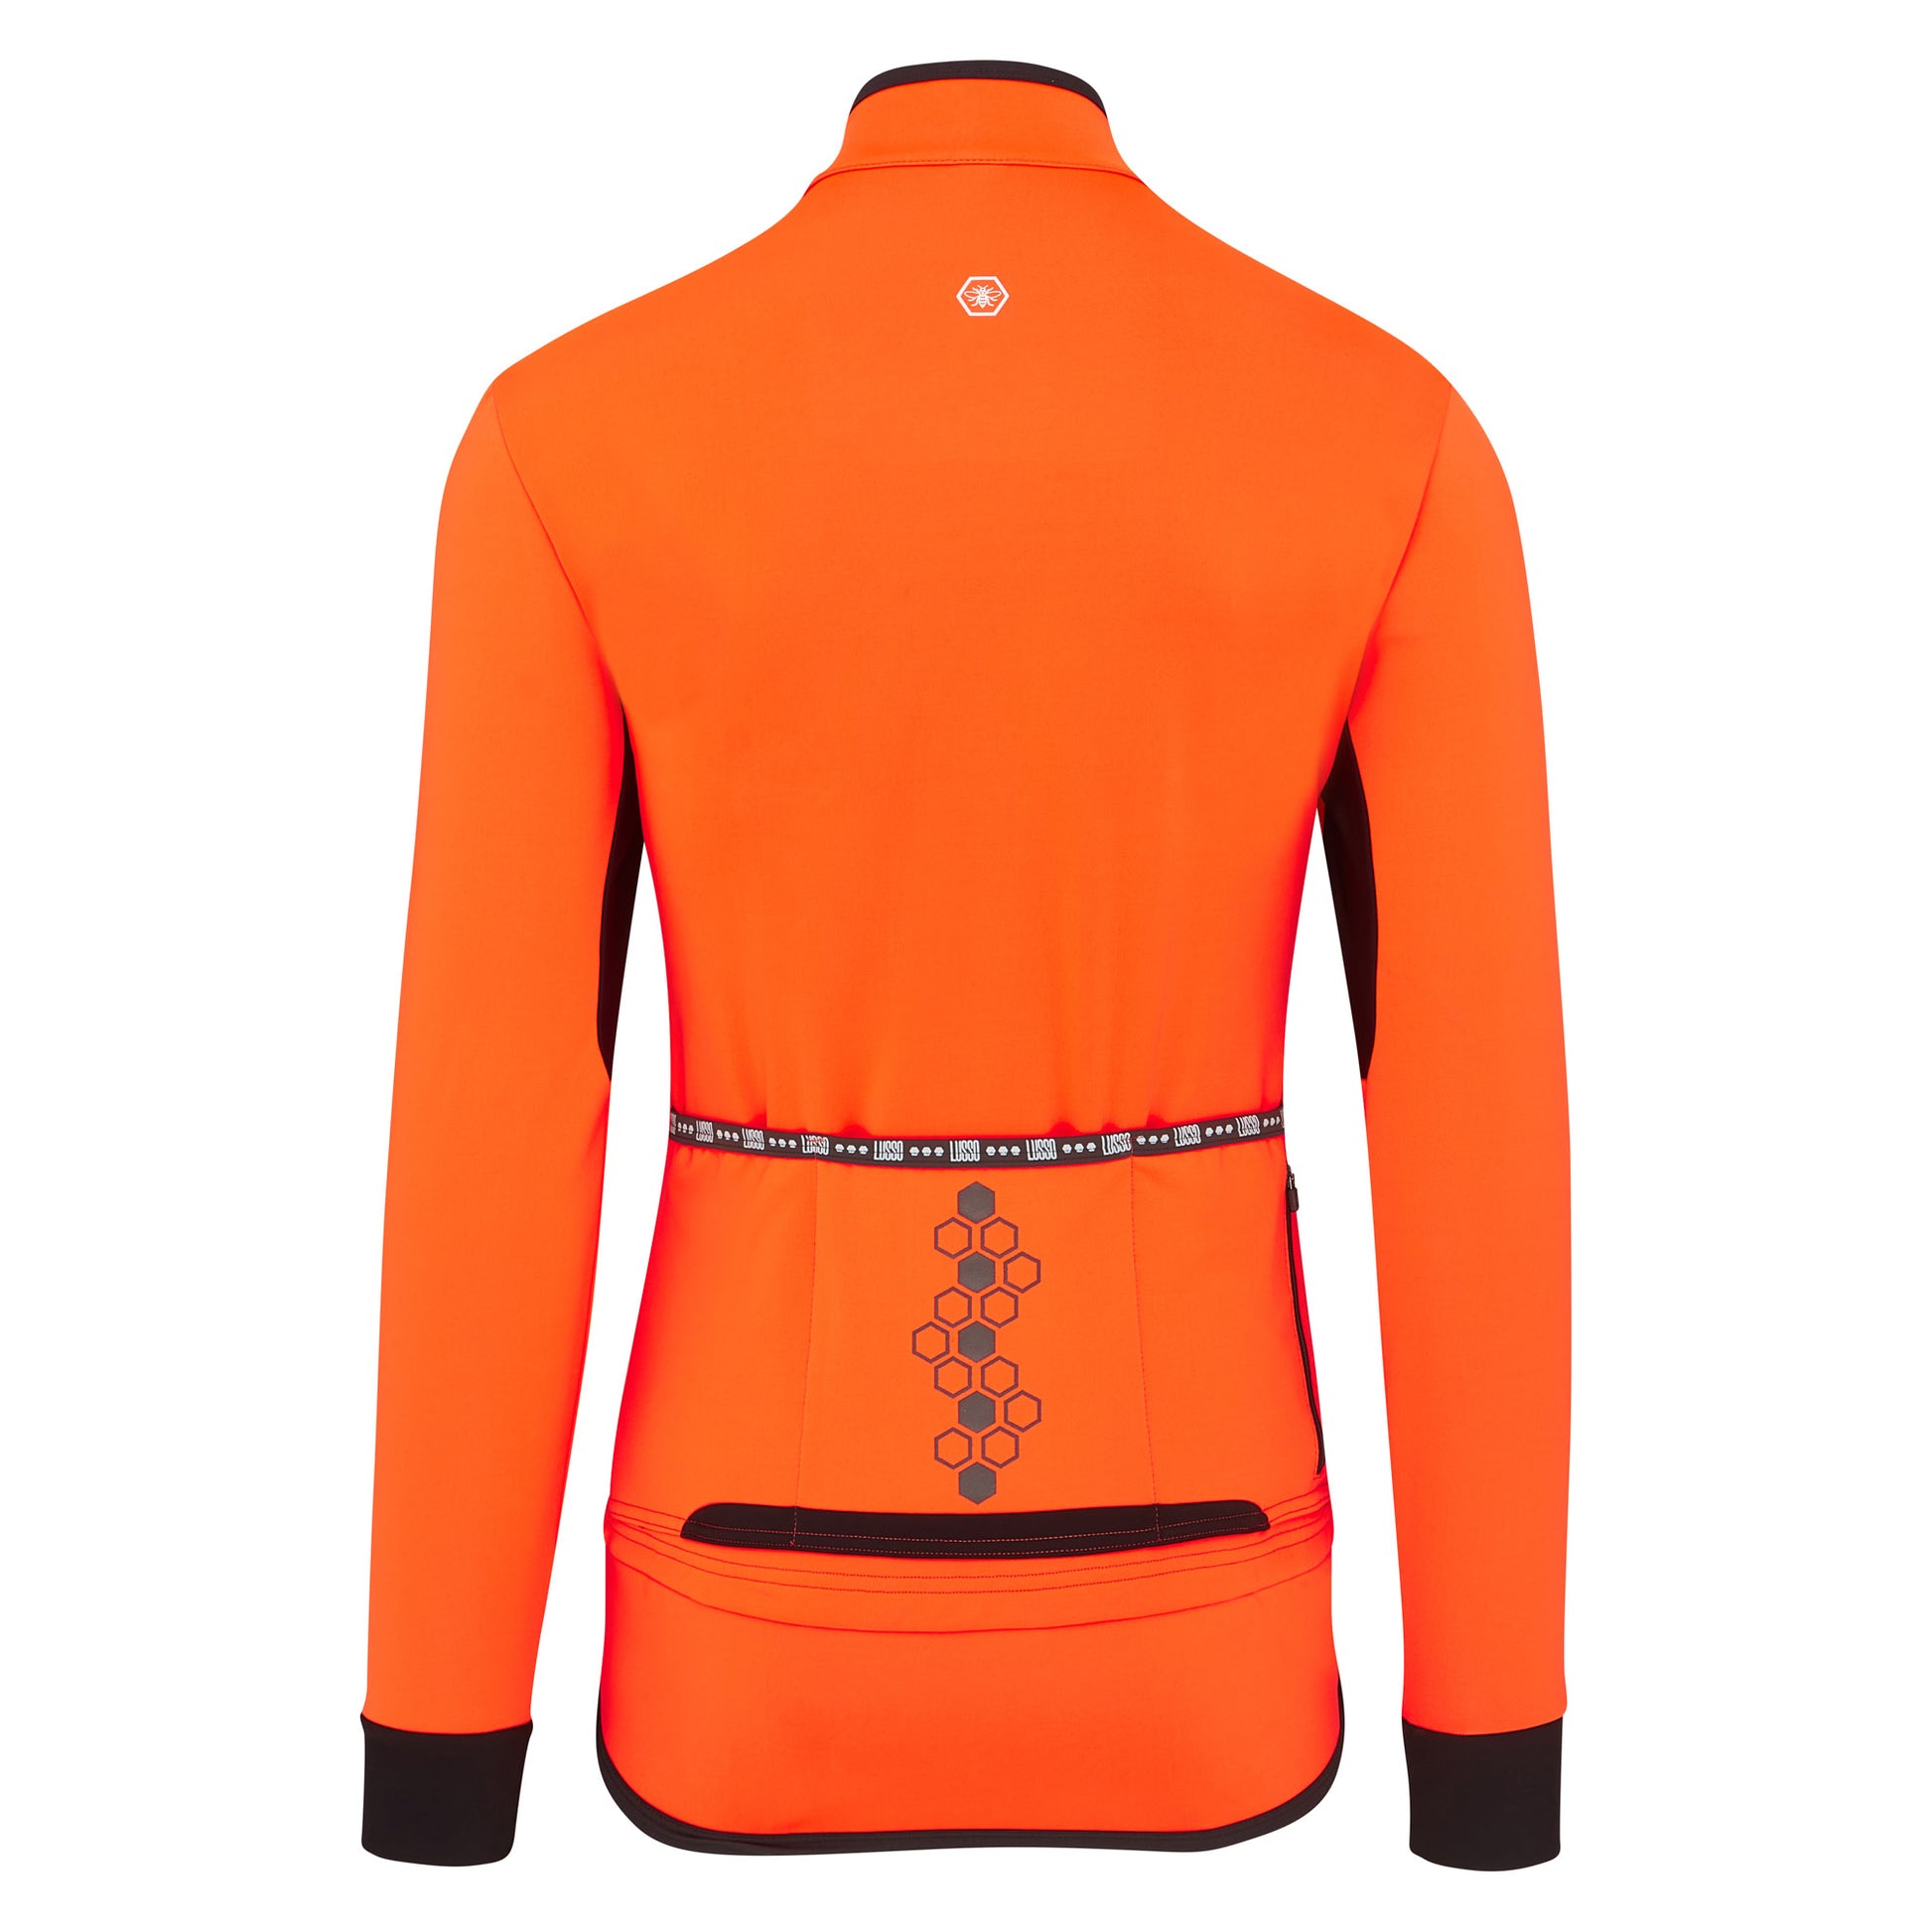 Perform Winter Jacket - Lusso Cycle Wear